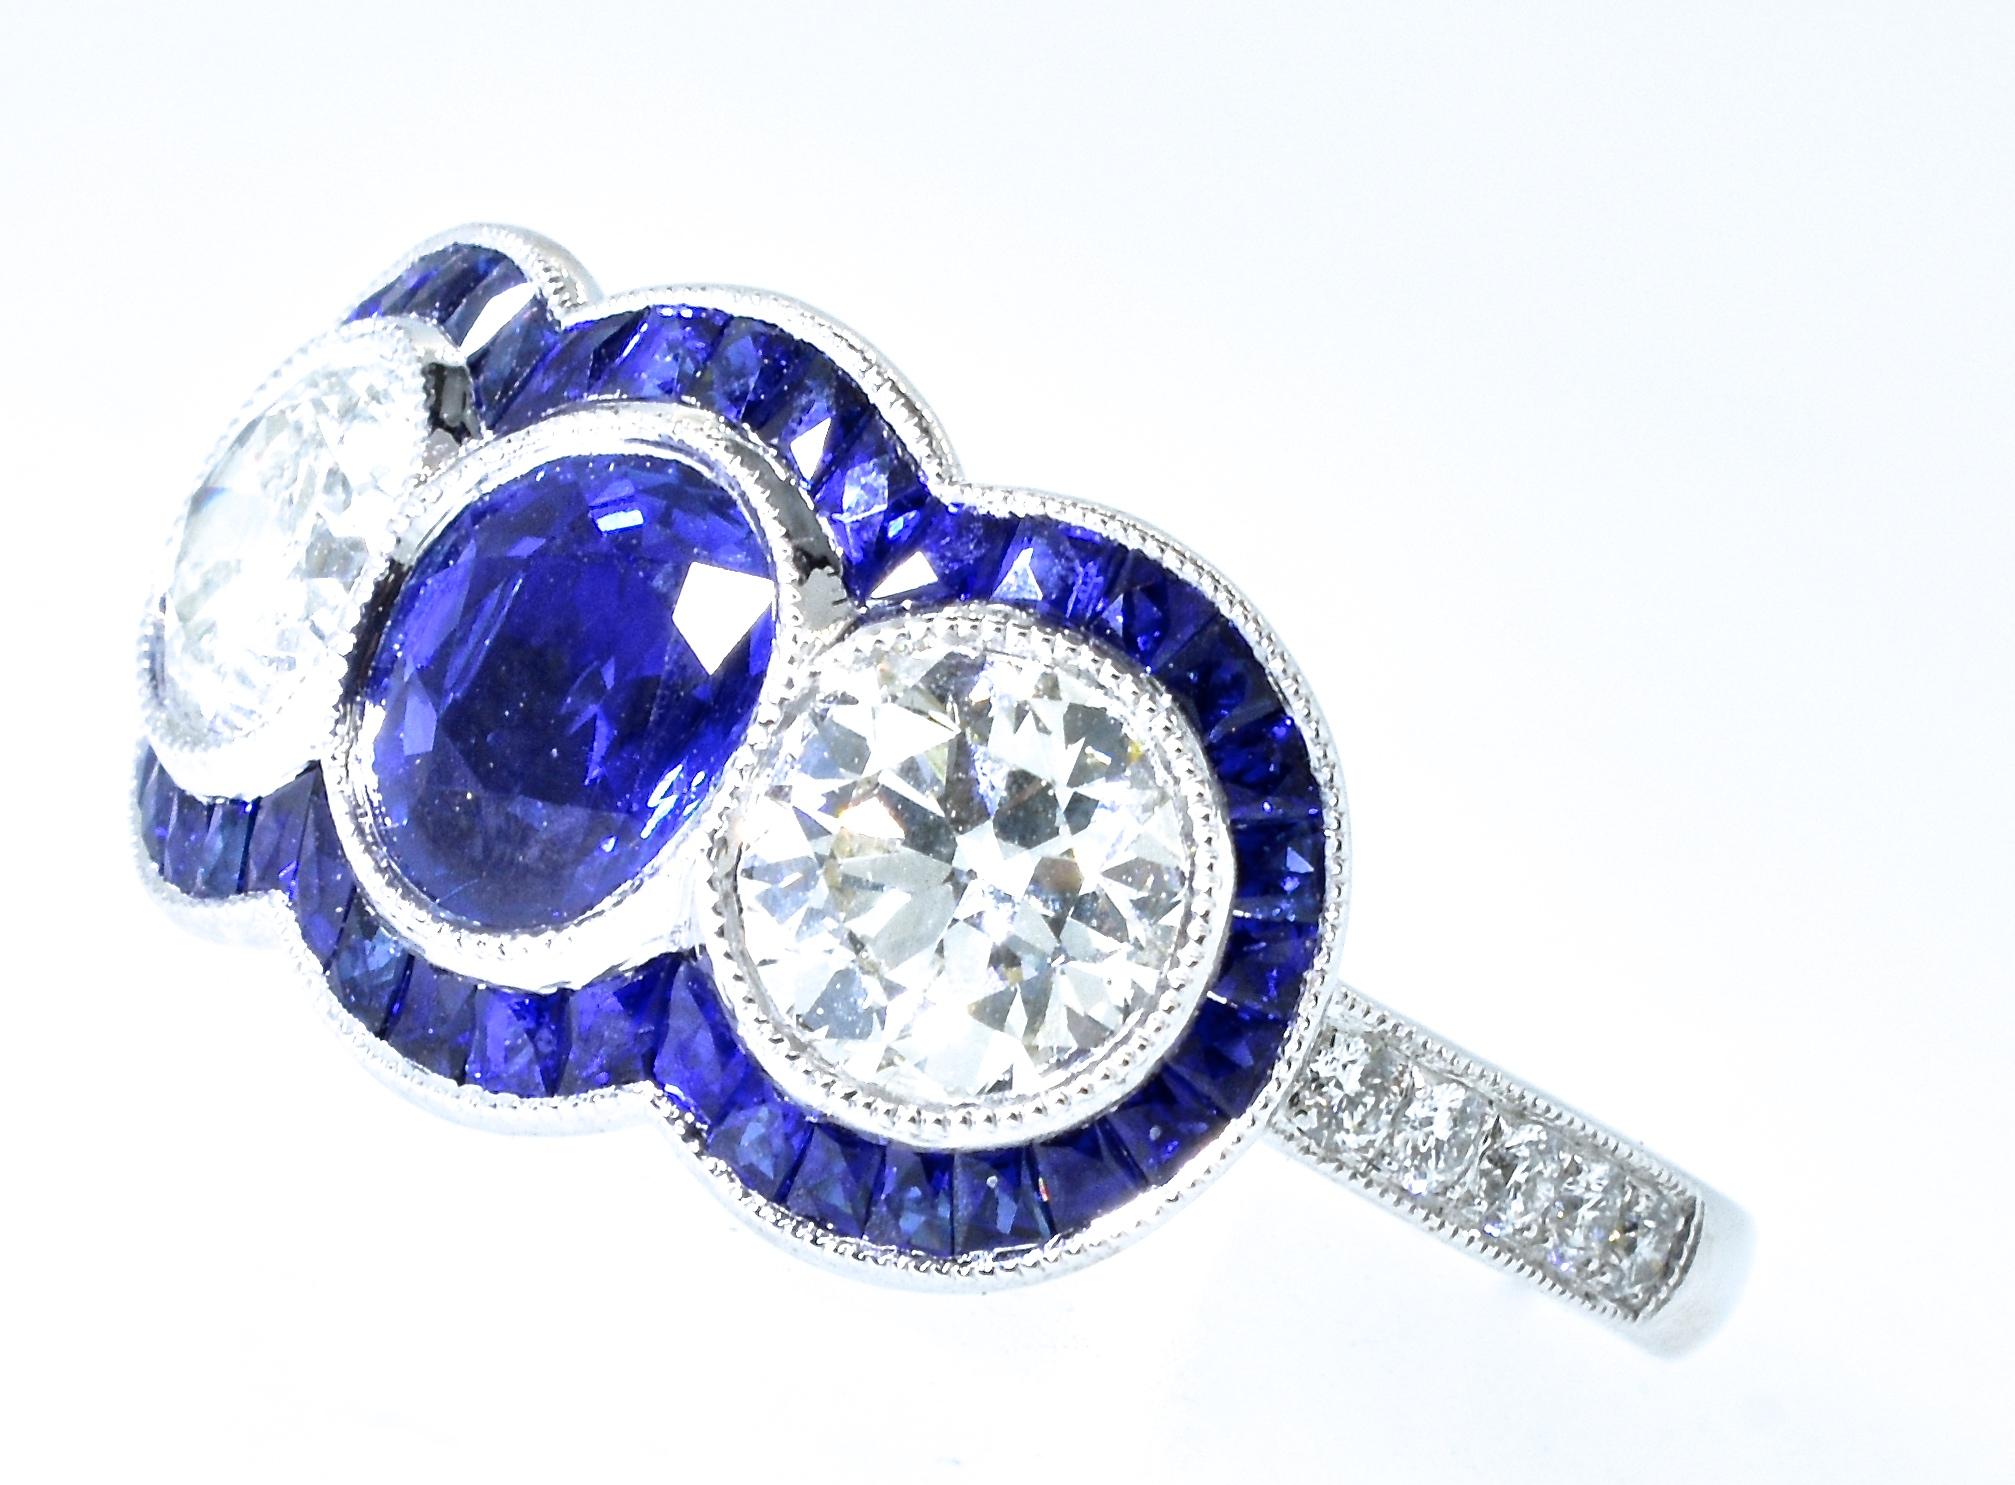 The center sapphire is natural and very fine in color and clarity.  The French cut sapphires surrounding and accenting the center stones are well matched and well cut.  The total sapphire weight is 2.0 cts.  The 2 larger white diamonds weigh 1.42